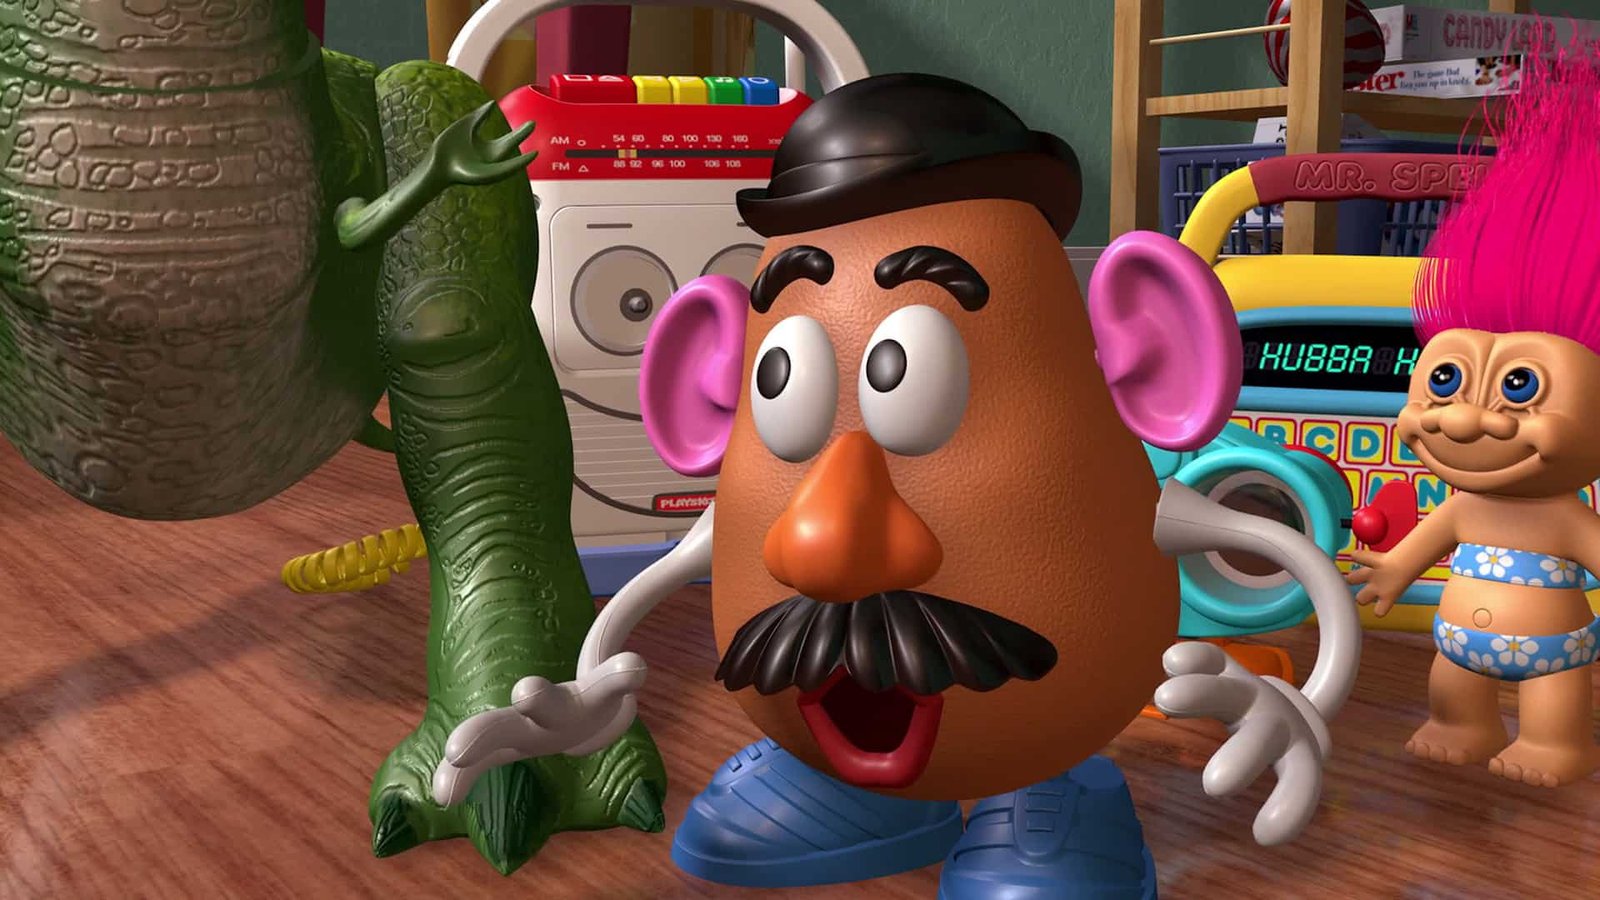 Monsieur patate personnage toy story 06